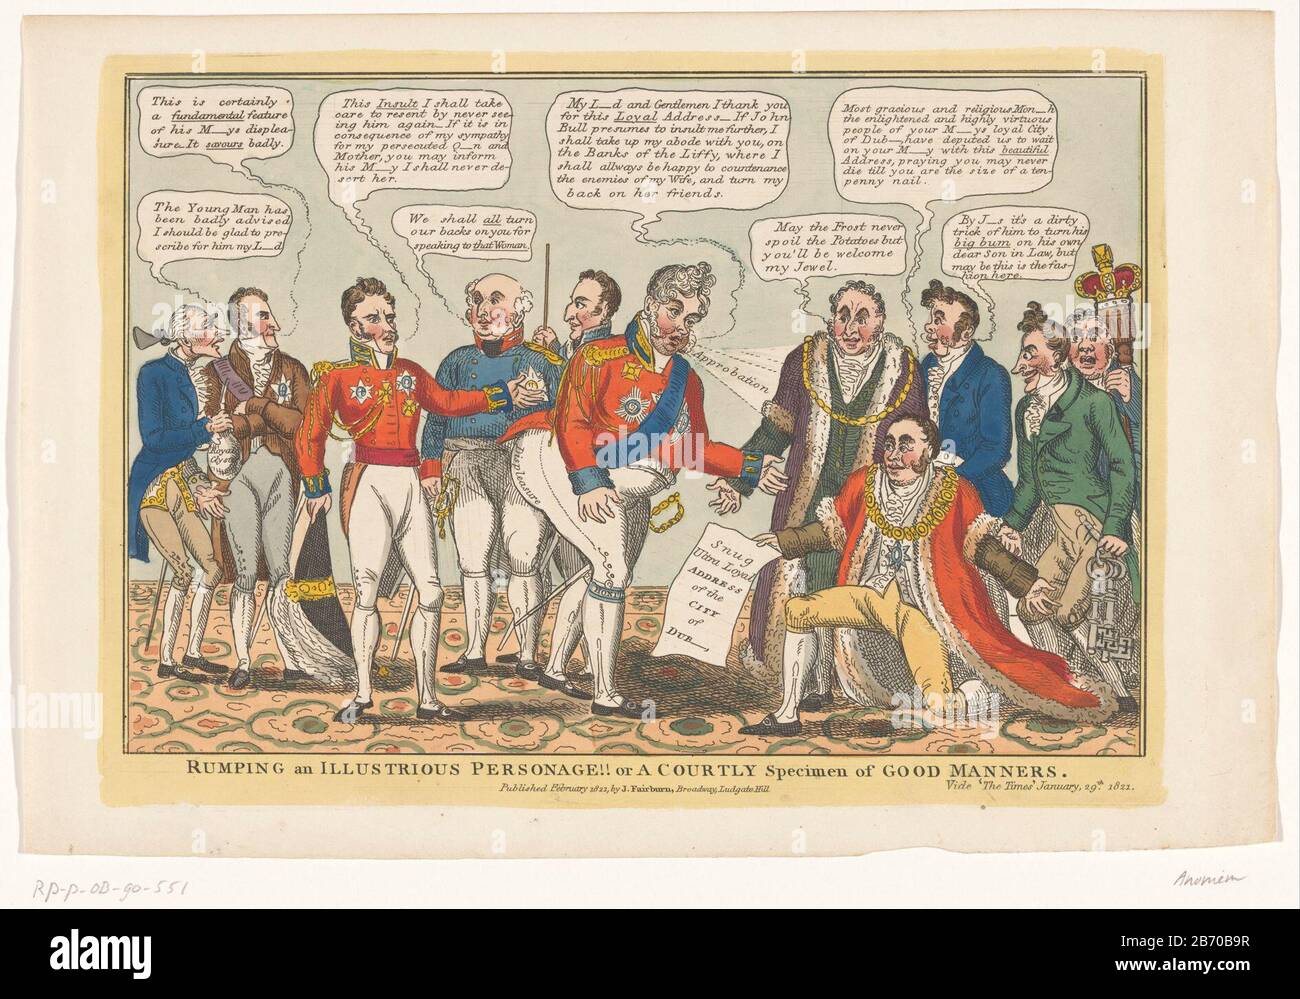 Koning George IV en Ierse gezanten, 1821 Rumping an illustrious personage or a courtly specimen of good manners (titel op object) Cartoon by King George IV in 1821 envoys from the Irish city of Dublin ontvangt. Manufacturer : printmaker: anonymous publisher John Fairburn (listed property) Place manufacture: printmaker: England Publisher: London Date: Feb 1821 Physical features: etching, hand-colored material: paper Technique: etching / hand color dimensions: plate edge: h 250 mm × W 355 mm Subject: diplomacy diploma twan down: 1821 - 1821 Stock Photo